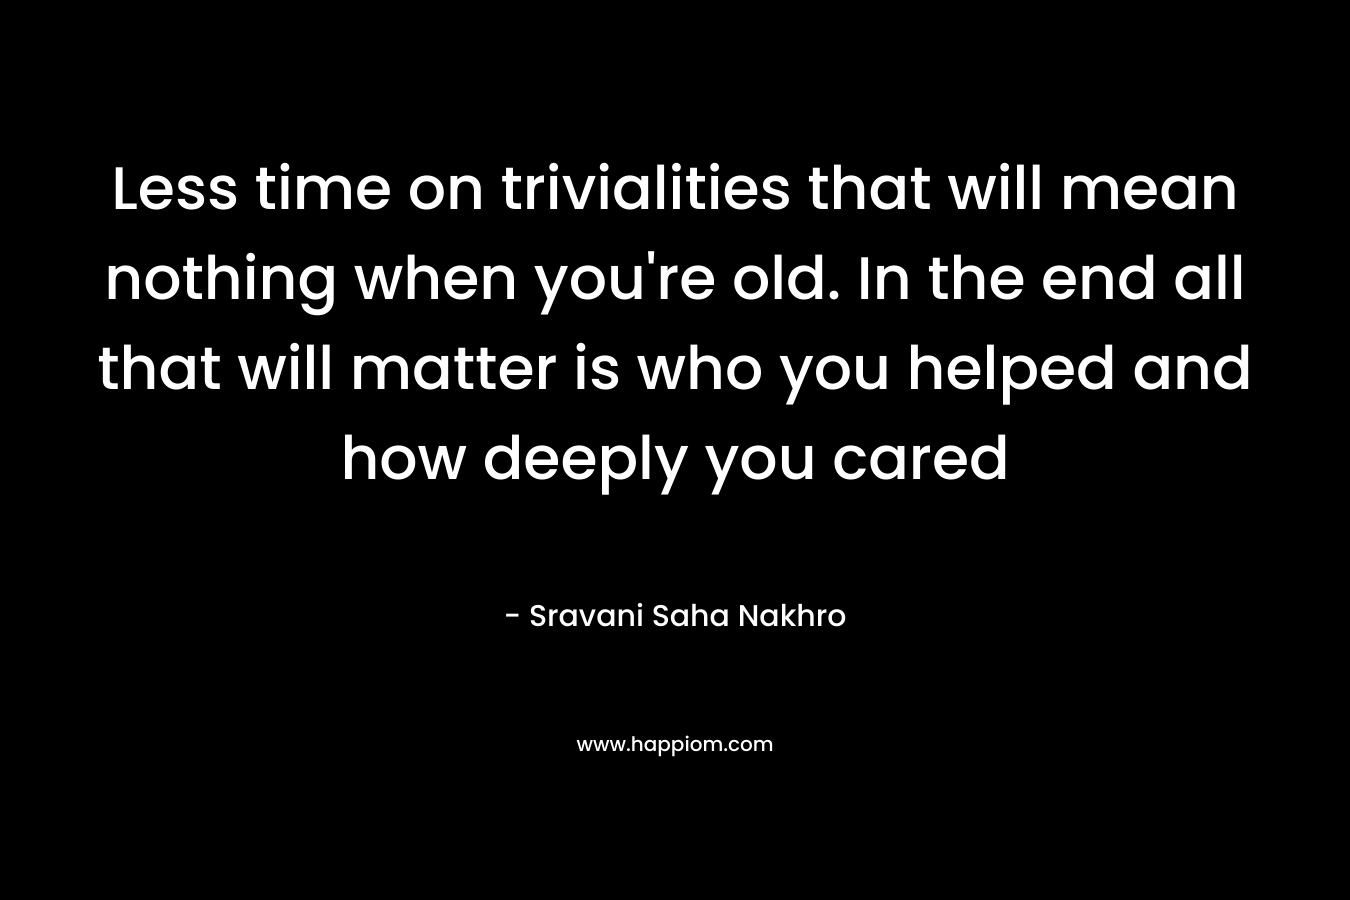 Less time on trivialities that will mean nothing when you're old. In the end all that will matter is who you helped and how deeply you cared